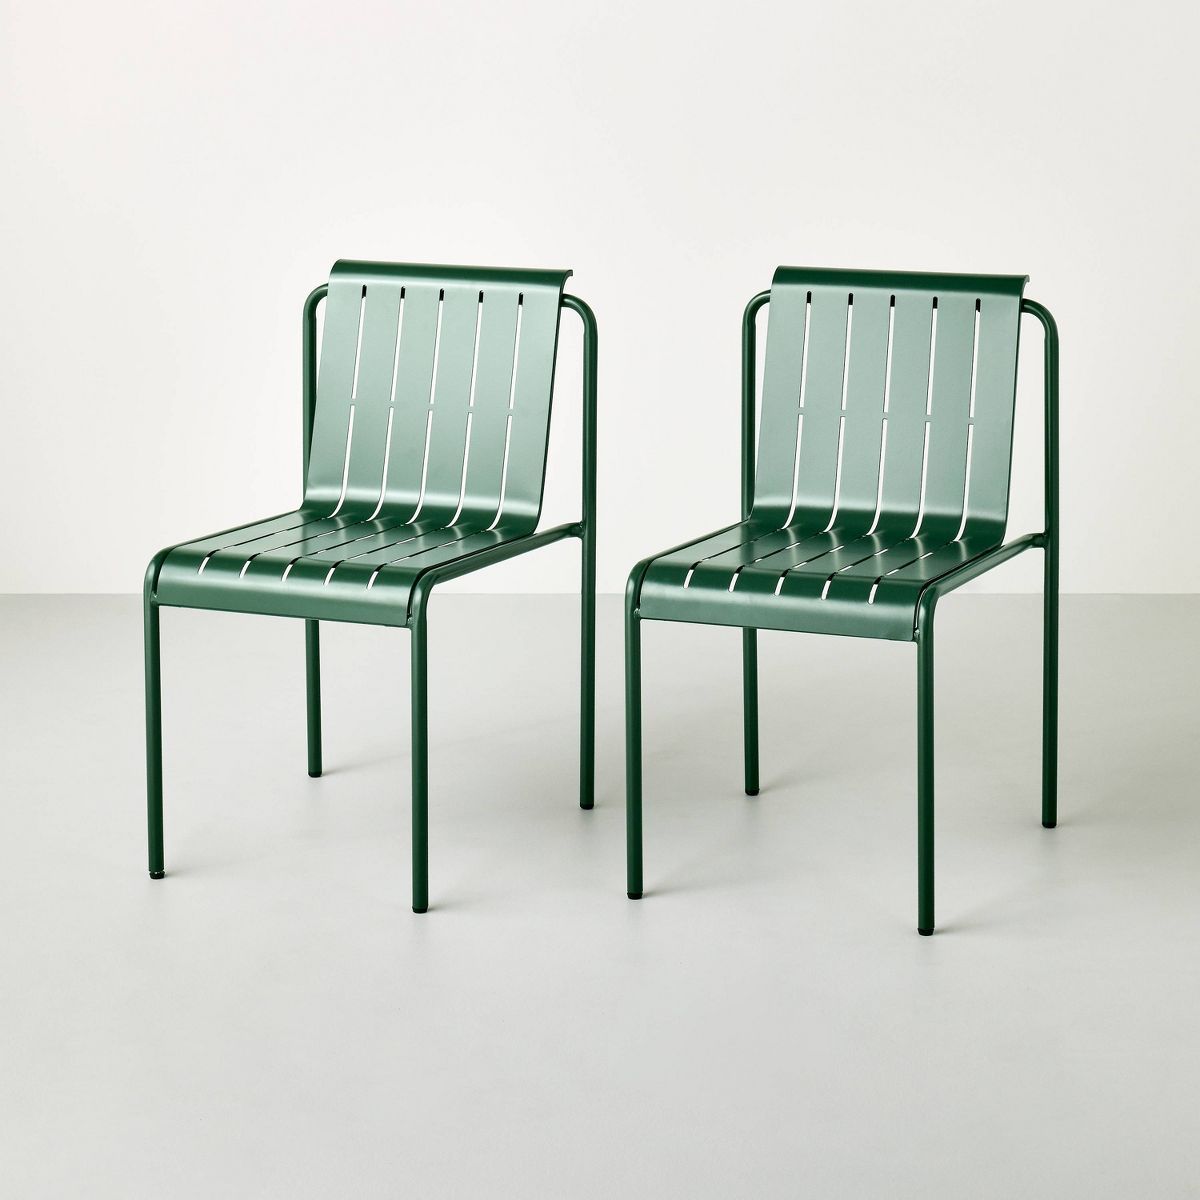 Slat Metal Outdoor Patio Dining Chairs (Set of 2) - Green - Hearth & Hand™ with Magnolia | Target